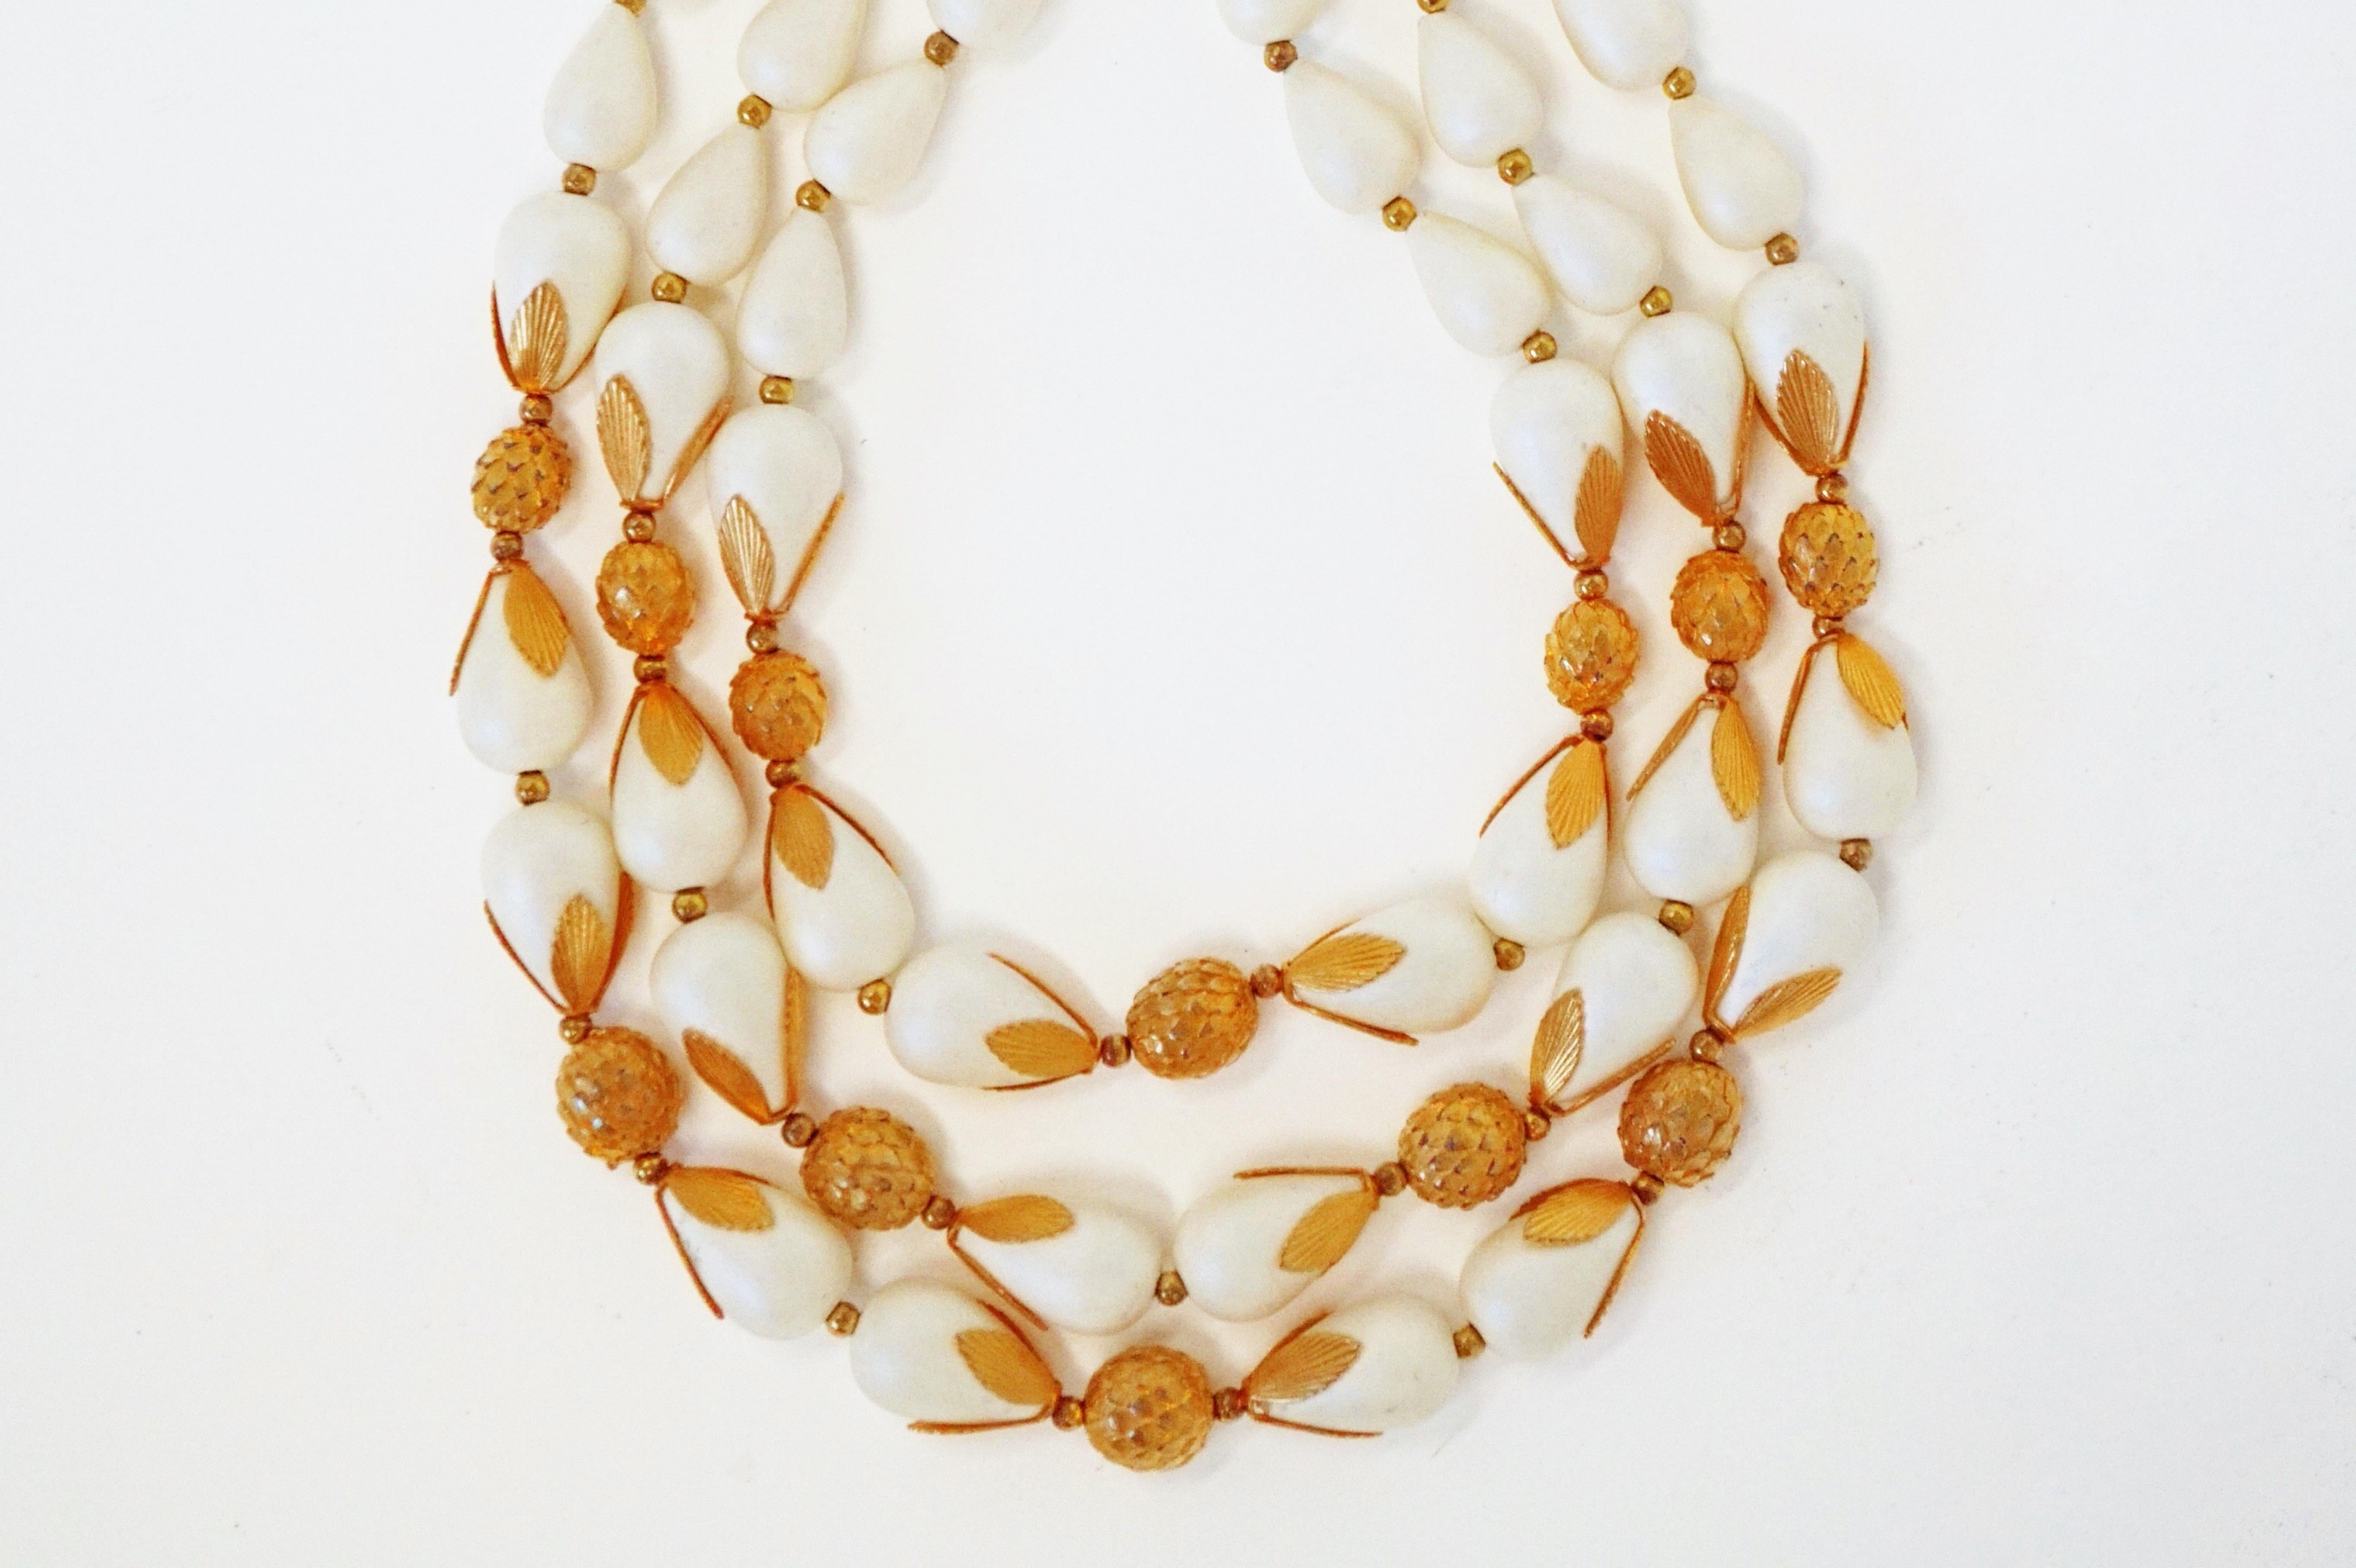 Women's Triple Strand Gilt Costume Statement Necklace by Deauville, Signed, circa 1950 For Sale